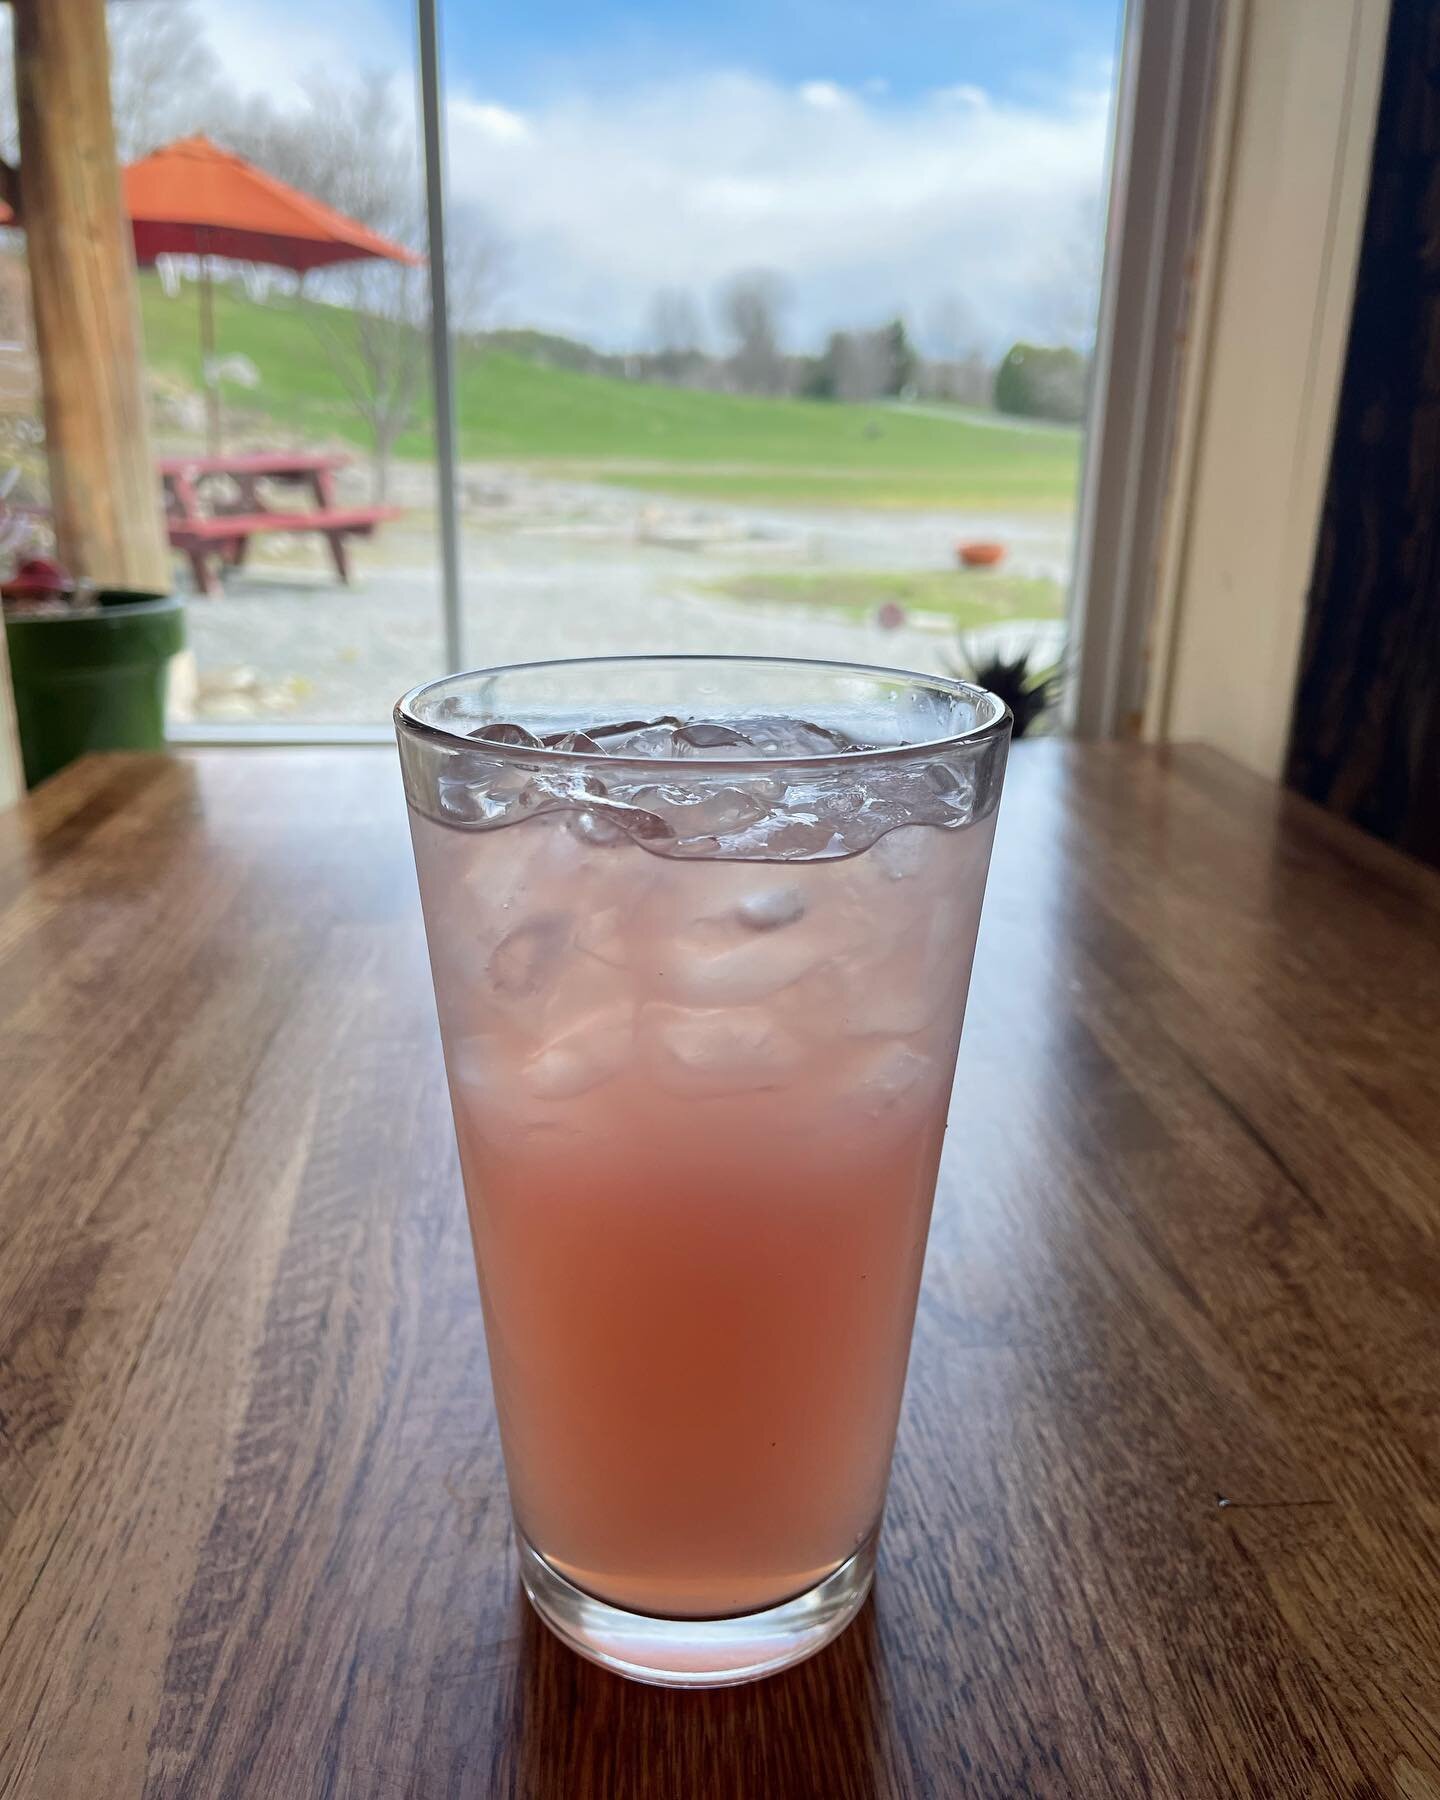 It&rsquo;s back and so is our indoor dining!! Lavender lemonade is on the menu til the fall again. 
I know it&rsquo;s a holiday weekend and I&rsquo;m going to do my best to have a good quantity of things like carrot cake and lemony things on hand but